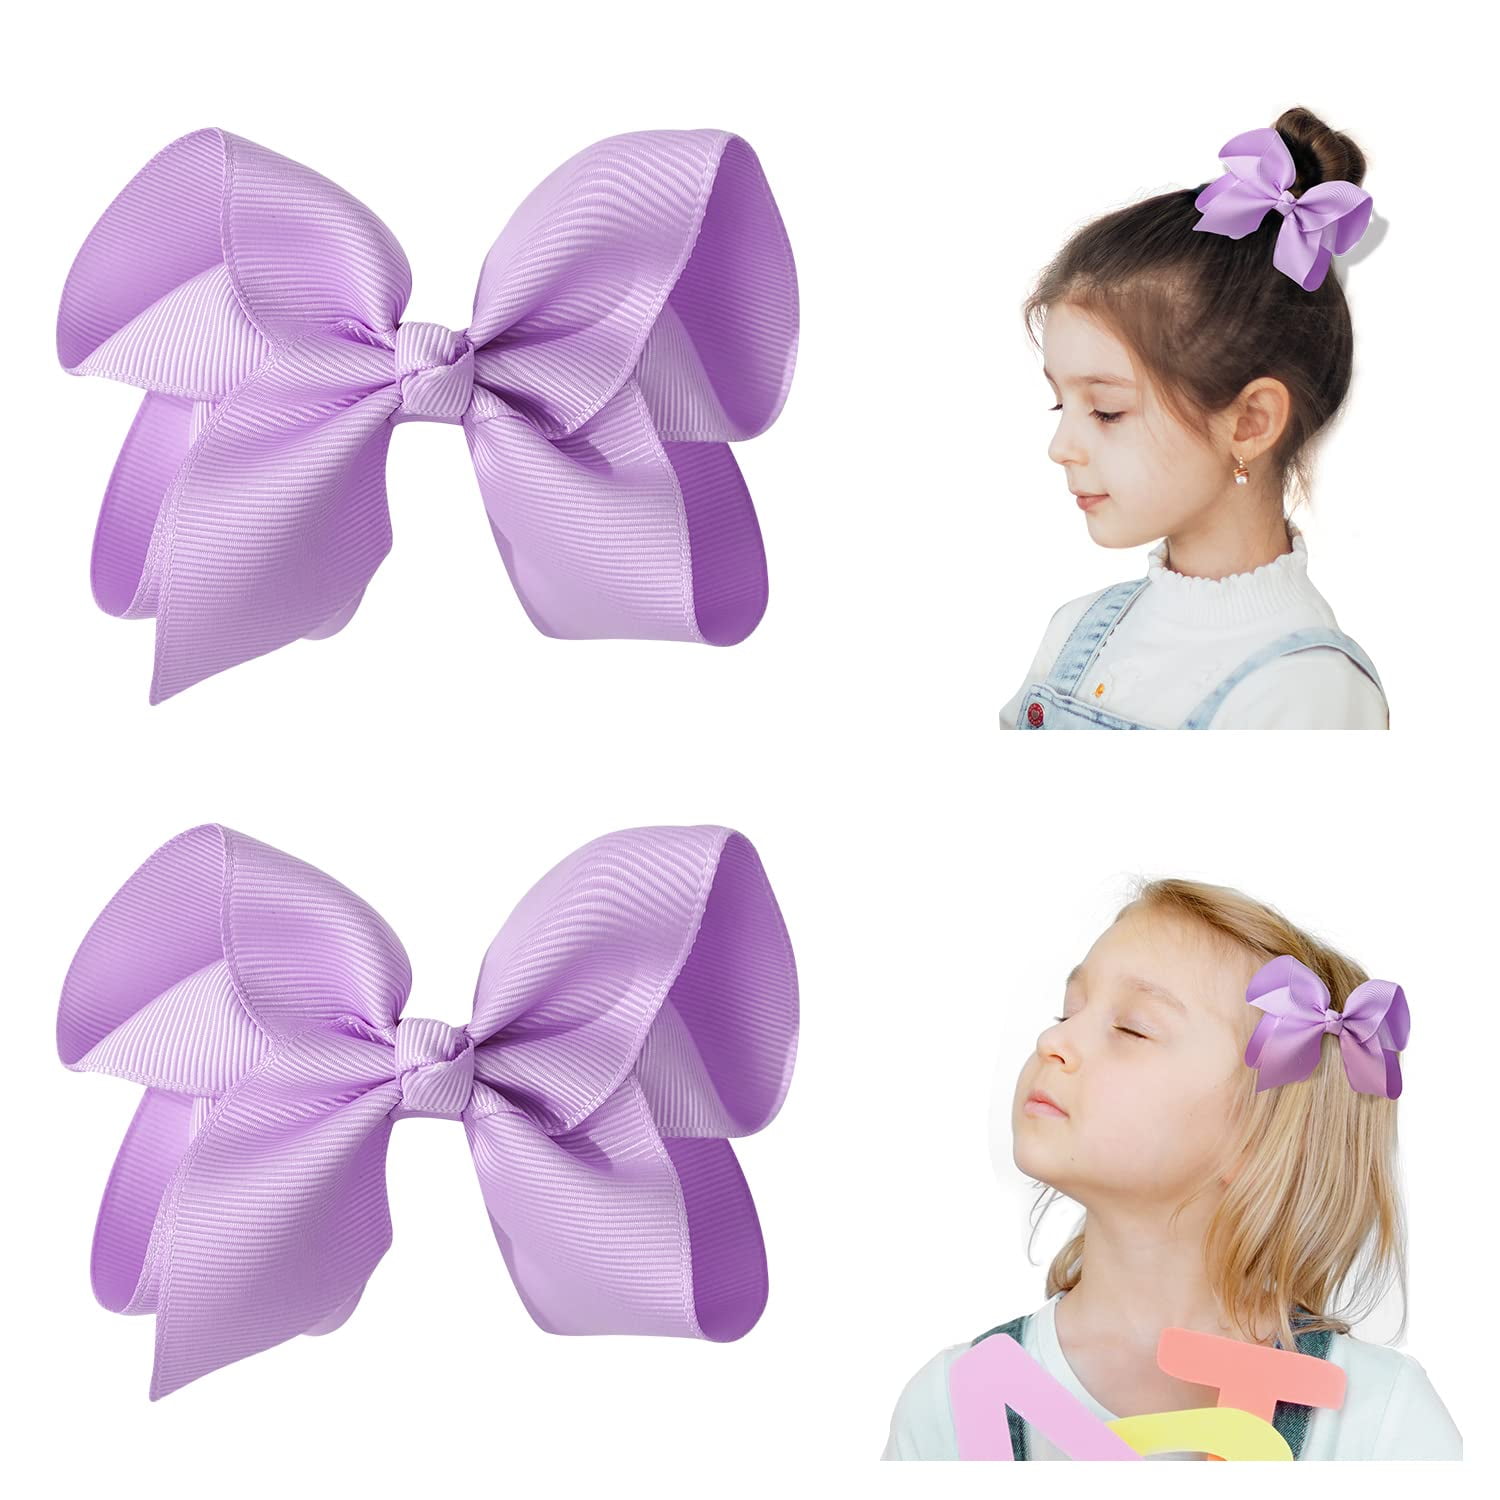 Southwit 2 PCS 6 Big Hand-made Grosgrain Ribbon Solid Color Hair